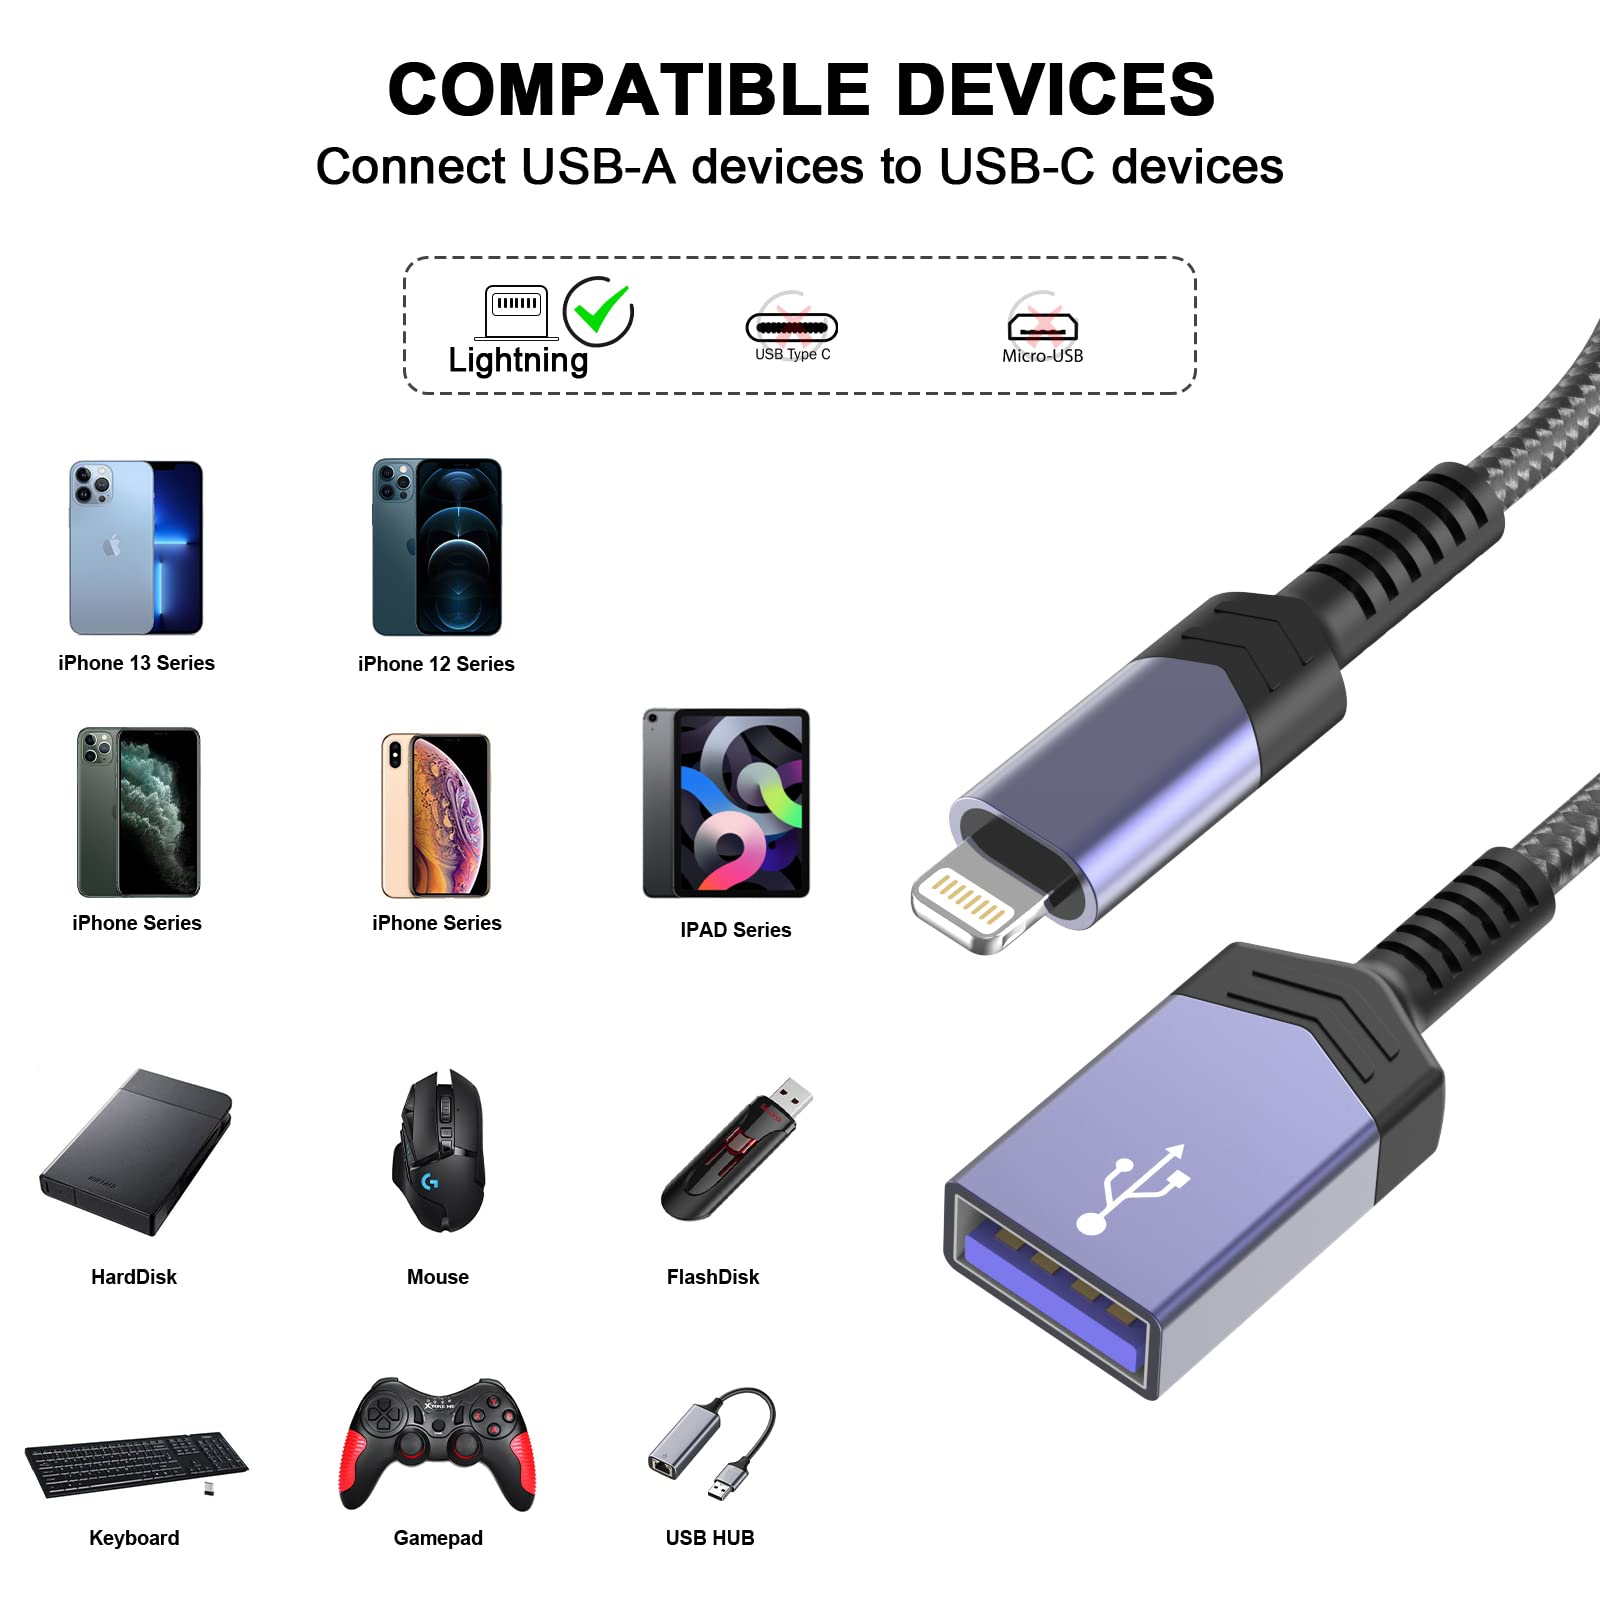 Lightning to USB Camera Adapter for iPhone,[Apple MFi Certified]USB 3.0 OTG Cable Adapter Converter Supports USB Flash Drive,Gamepad,HUB,Card Reader,Mouse,Keyboard,MIDI Compatible with iPhone/iPad iOS